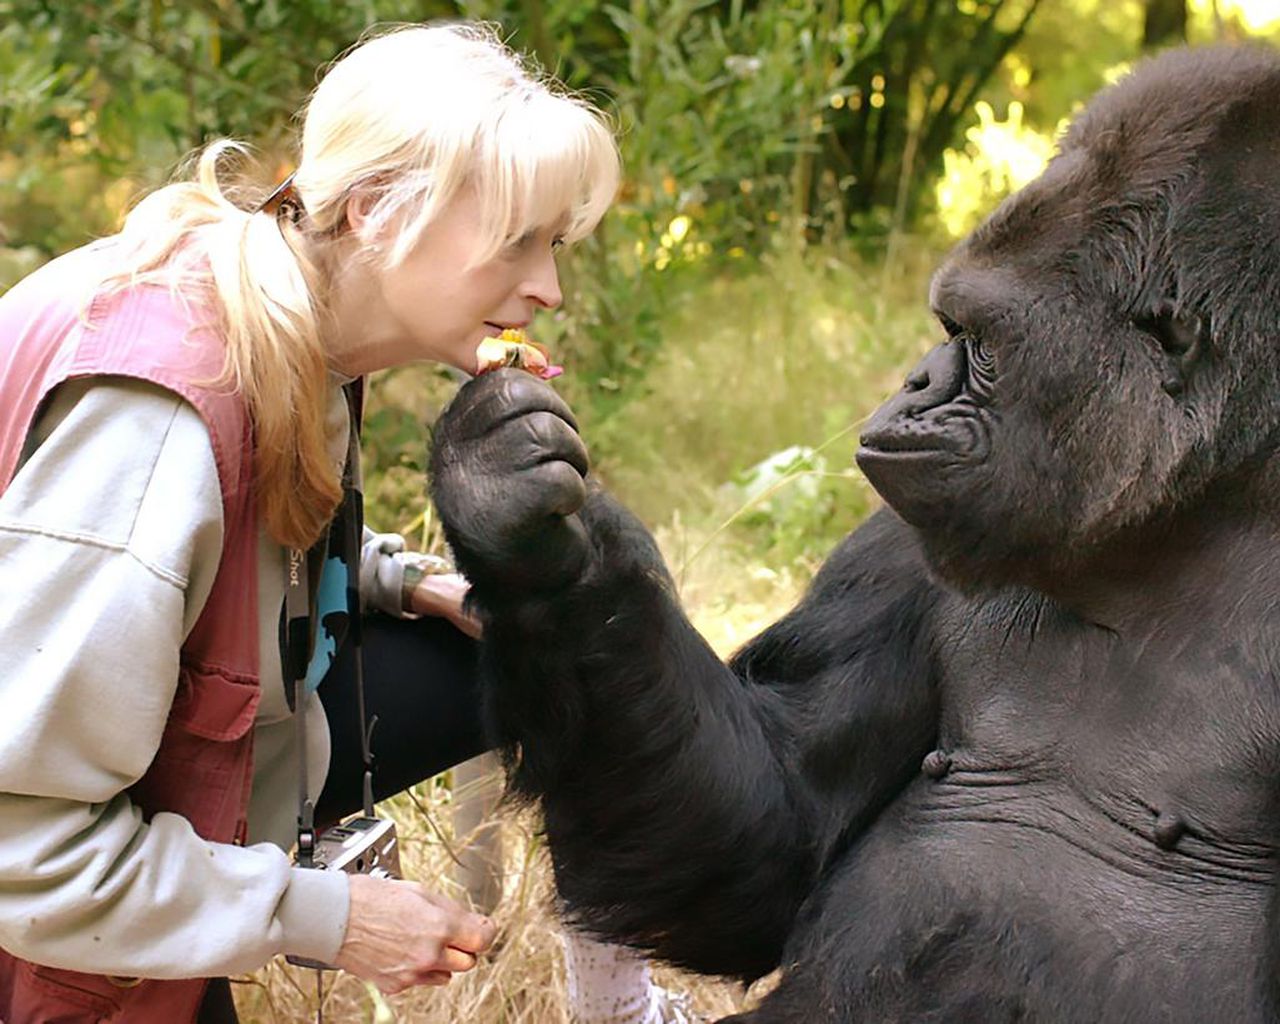 What we learned from Koko the gorilla